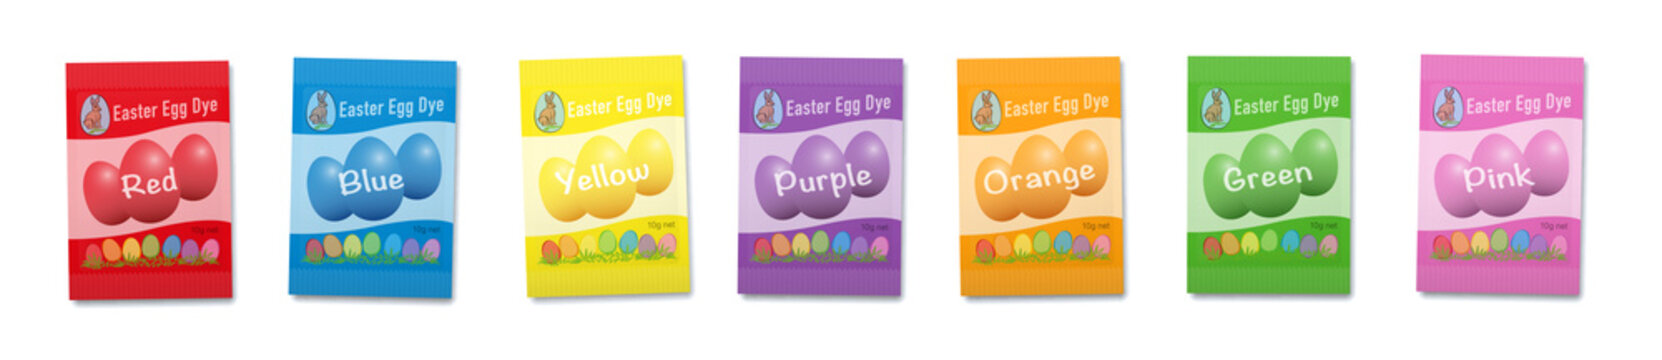 Easter egg dye sachets rainbow. Set with seven favorite colors red, orange, yellow, green, blue, purple and pink. Variuos paper envelopes. Isolated vector illustration on white background.
